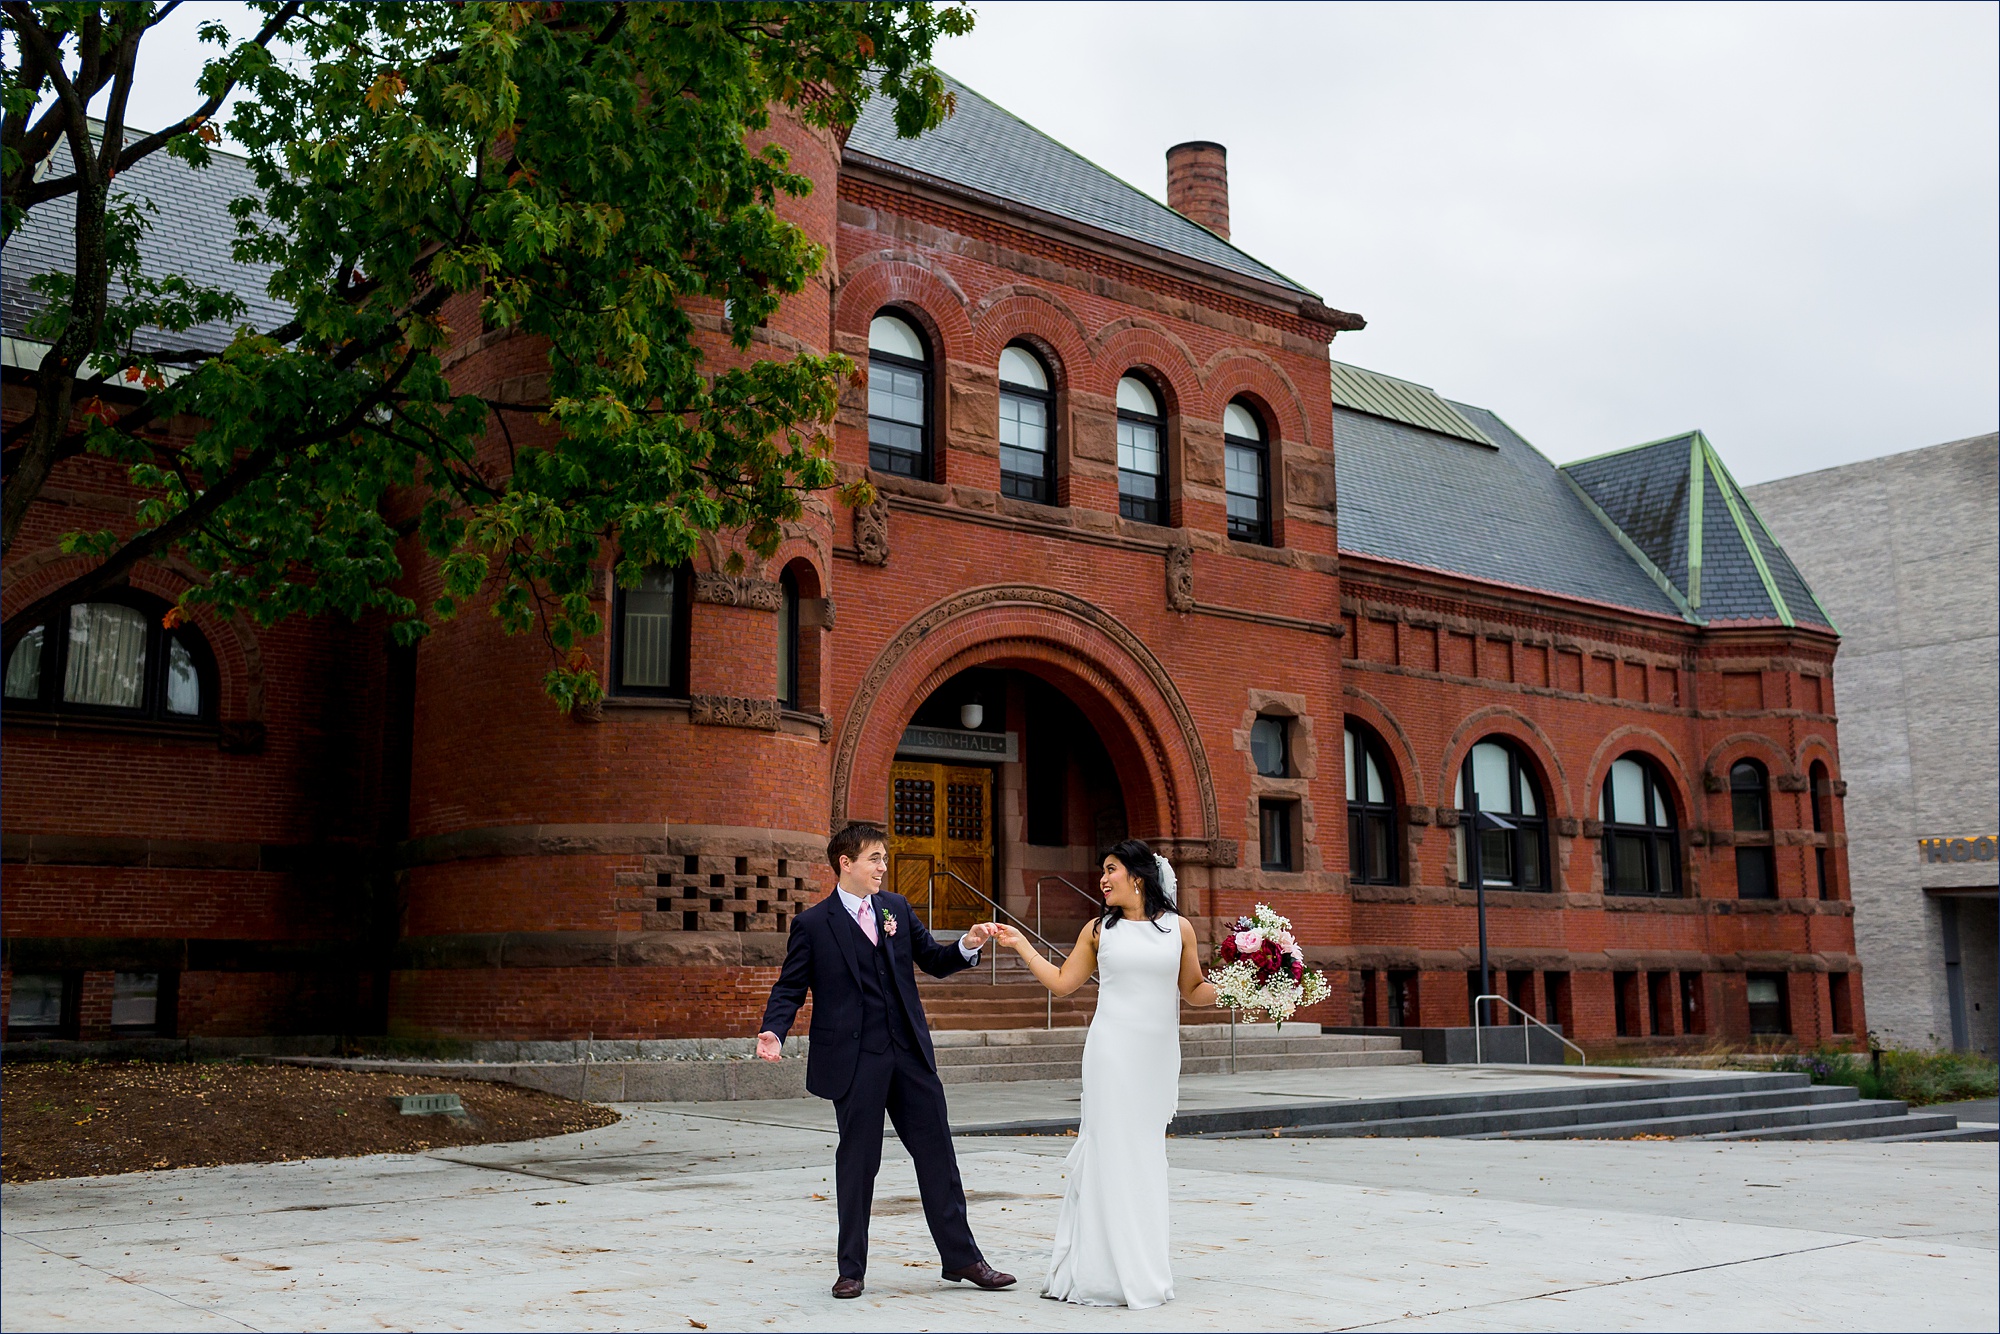 The bride and groom dance with one another after eloping on the Dartmouth NH campus